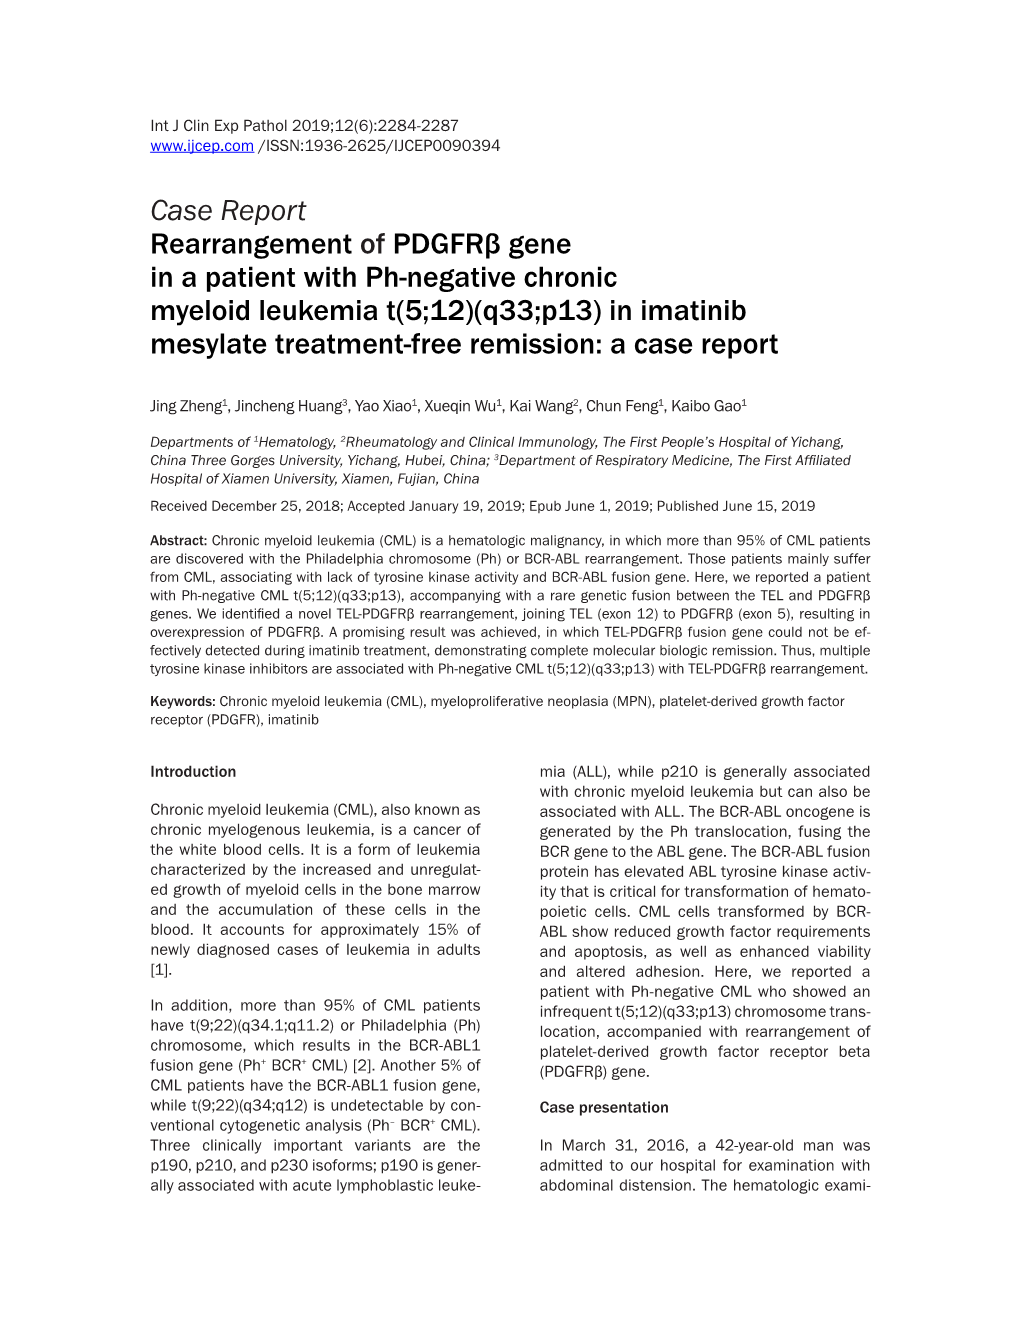 Case Report Rearrangement of Pdgfrβ Gene in a Patient with Ph